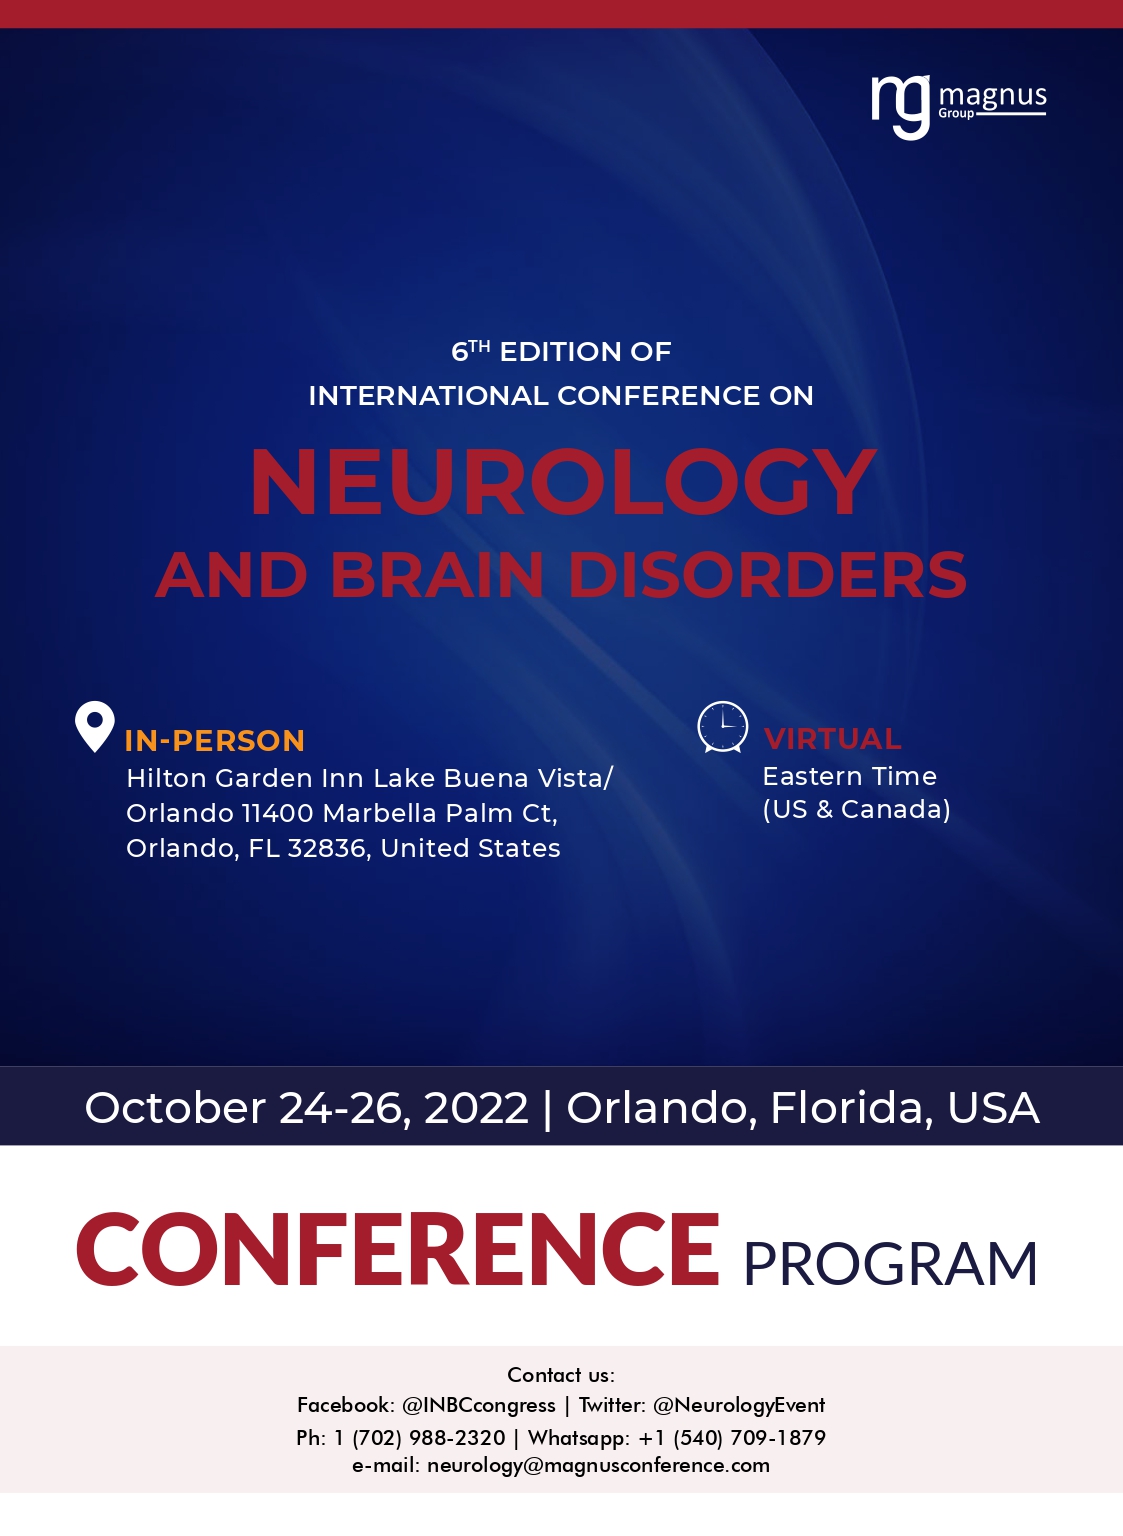 6th Edition of International Conference on Neurology and Brain Disorders Program